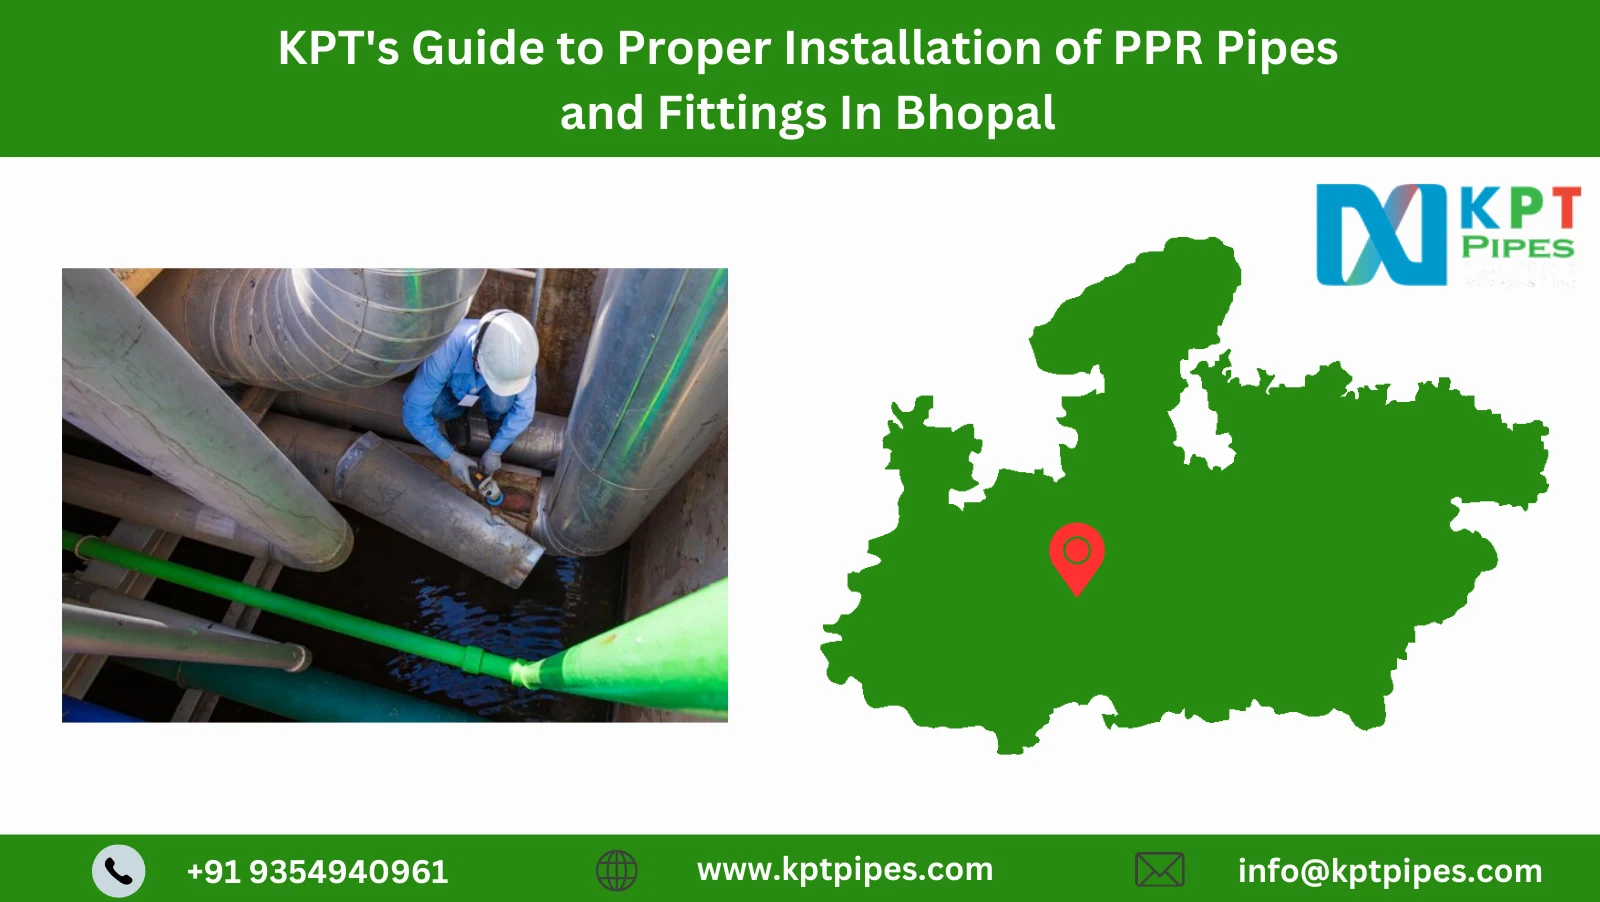 PPR Pipes and Fittings In Bhopal